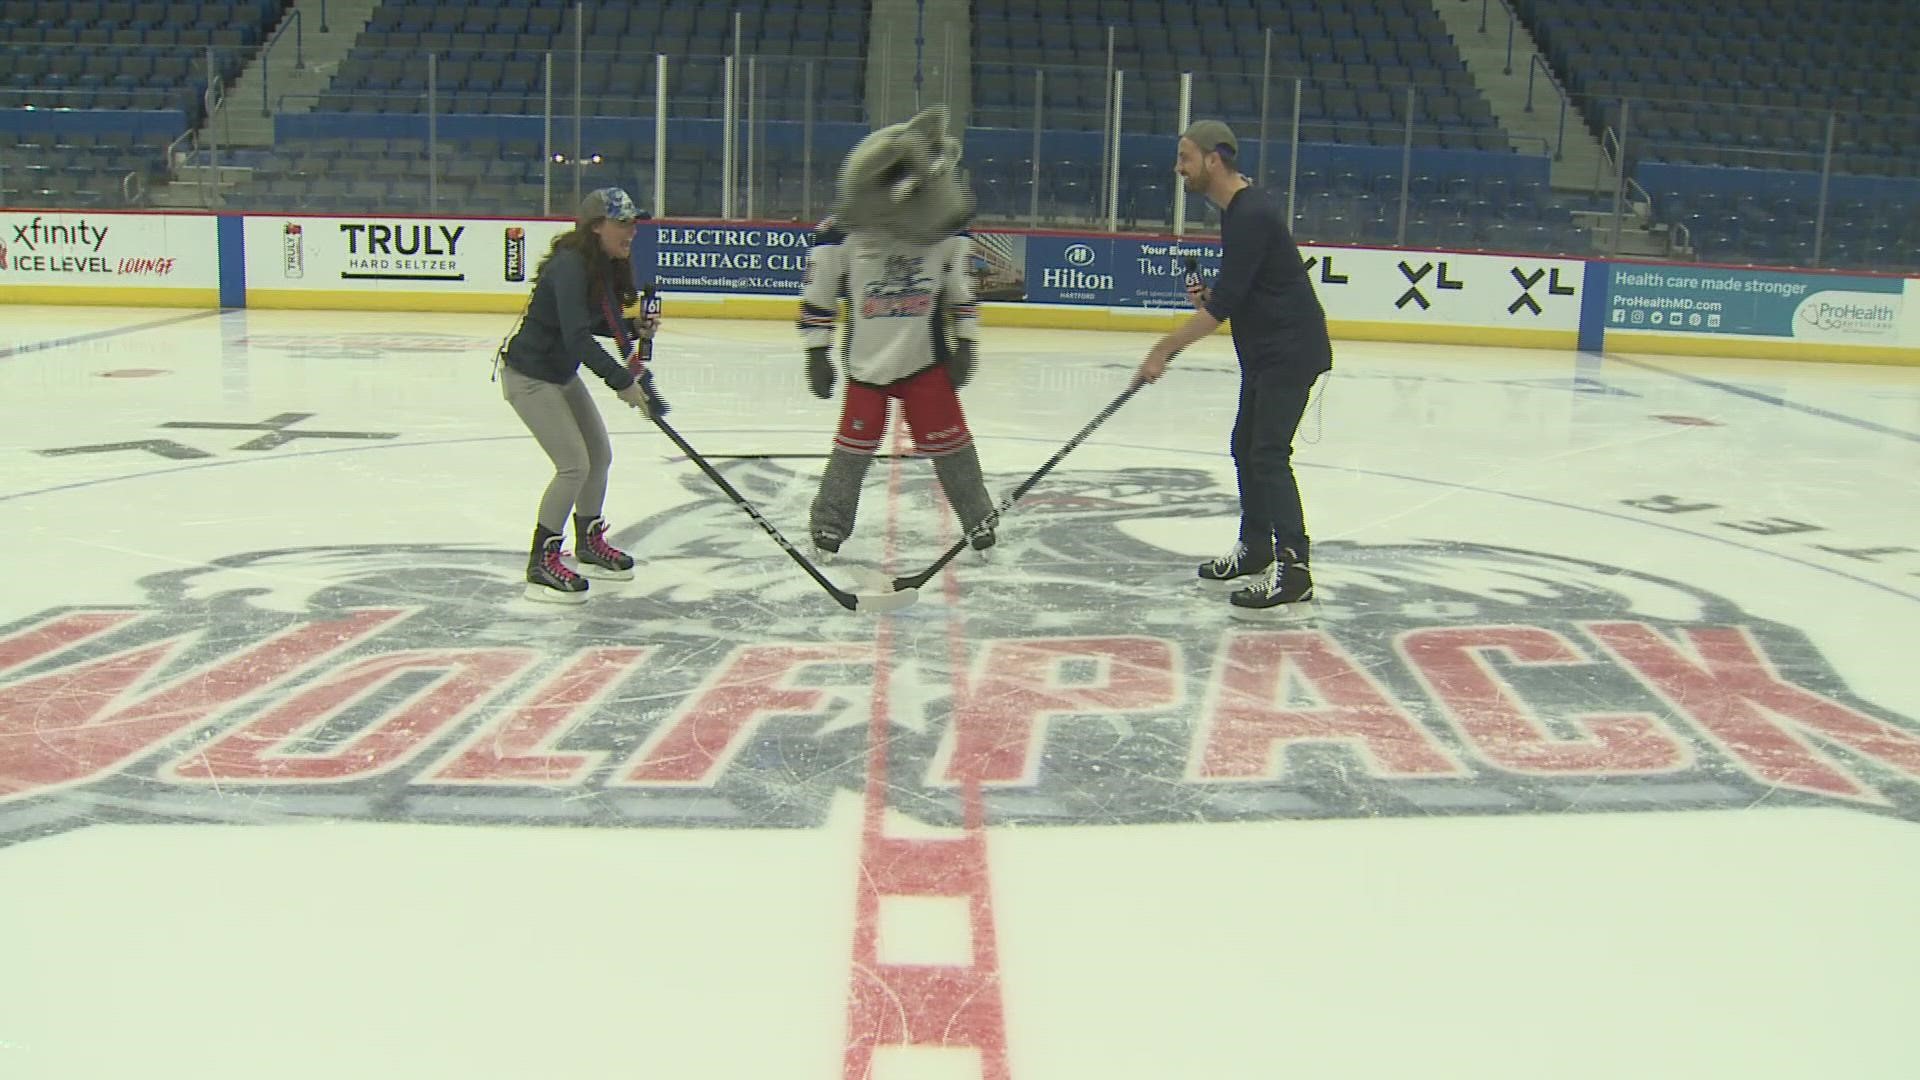 FOX61's Keith McGilvery and Rachel Piscitelli visit the Hartford Wolf Pack at the XL Center, part of the Winter Bucket List.